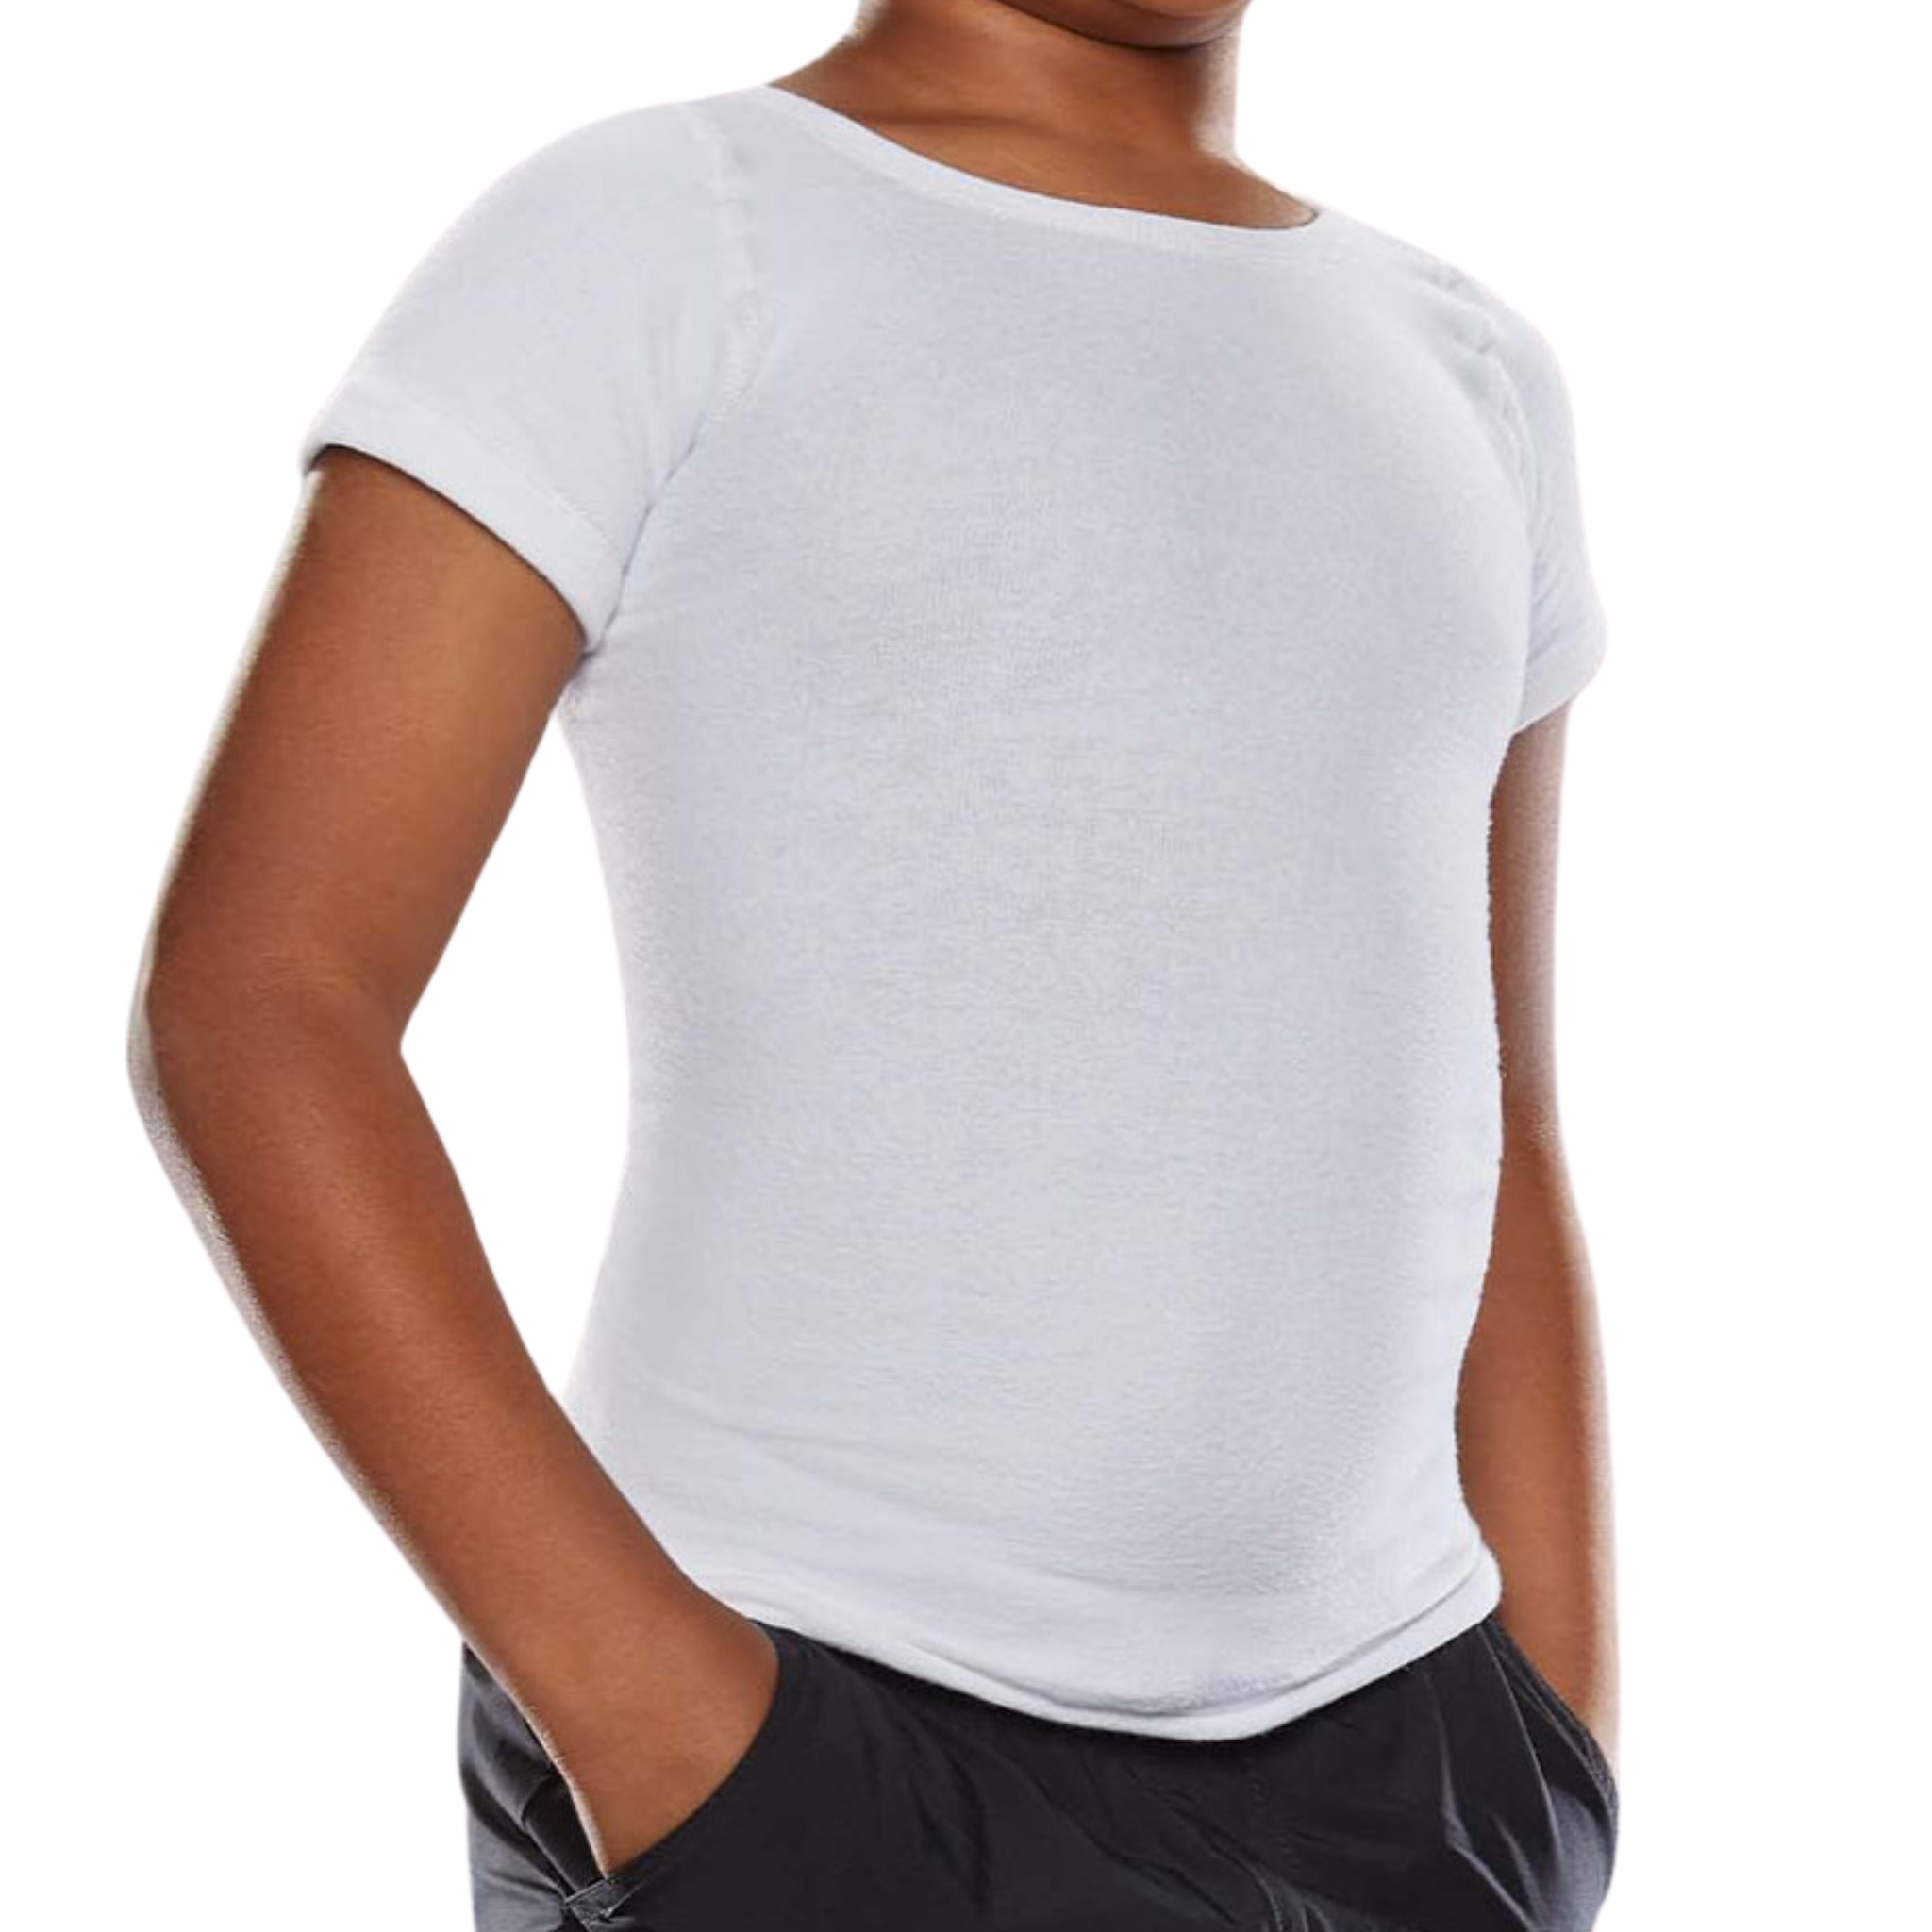 Knit-Rite - Unisex Seamless Torso Interface for Brace - Crew Neck with Sleeves